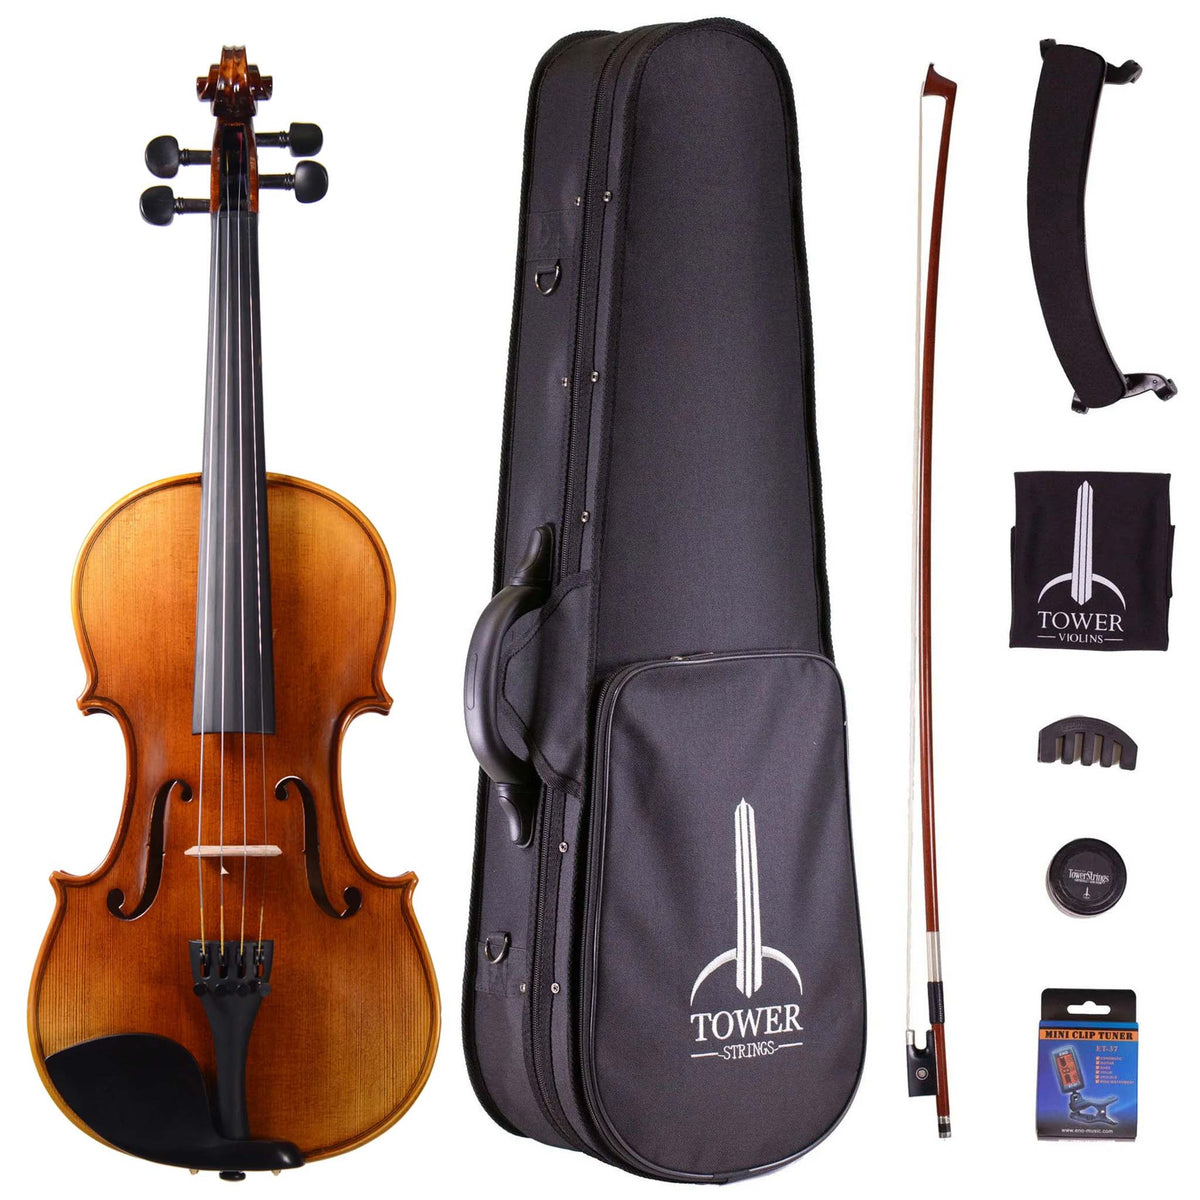 B-Stock Tower Strings Legend Violin Outfit